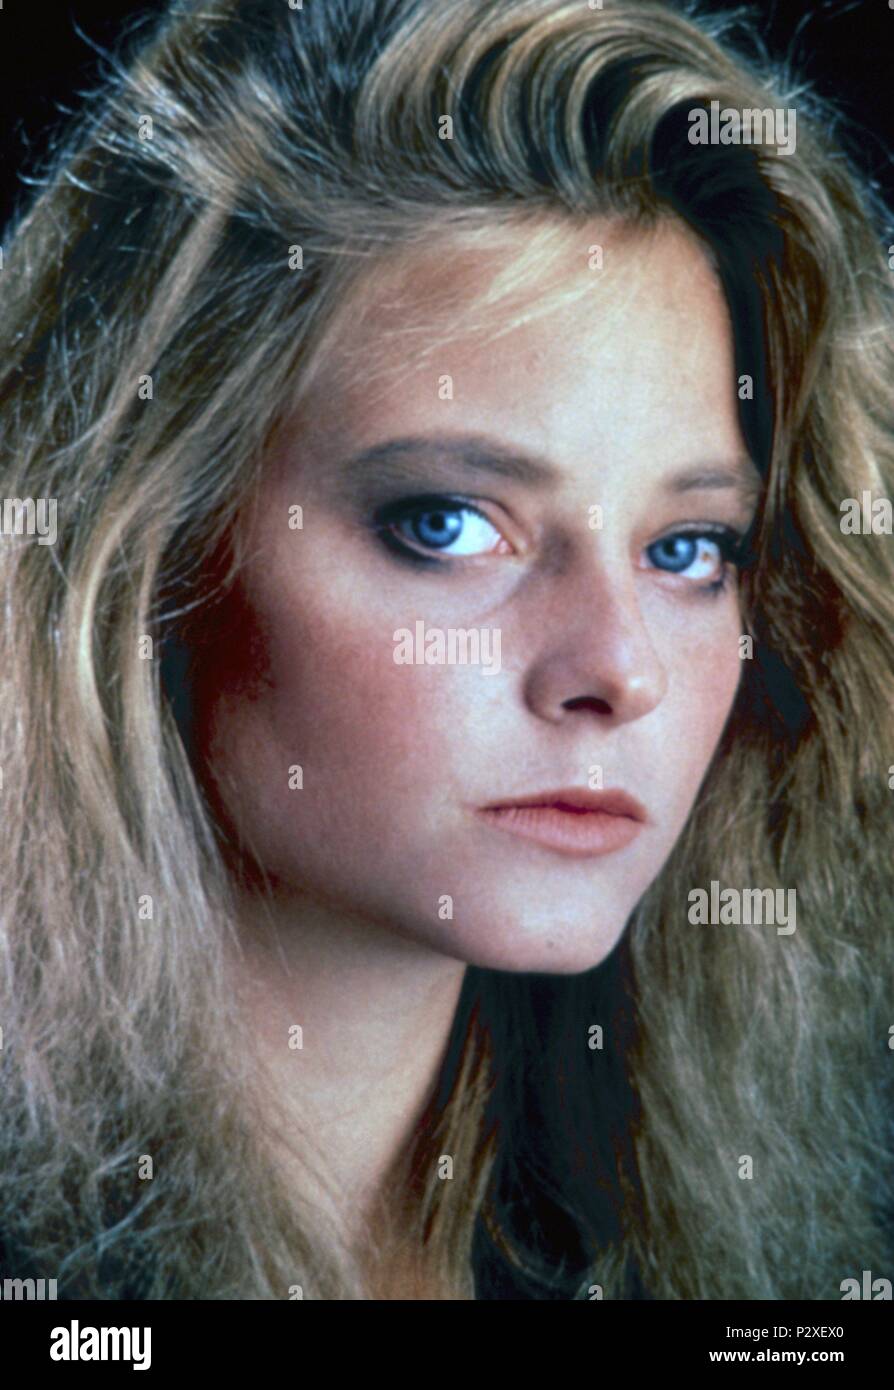 Original Film Title: THE ACCUSED. English Title: THE ACCUSED. Film  Director: JONATHAN KAPLAN. Year: 1988. Stars: JODIE FOSTER. Credit:  PARAMOUNT PICTURES / Album Stock Photo - Alamy